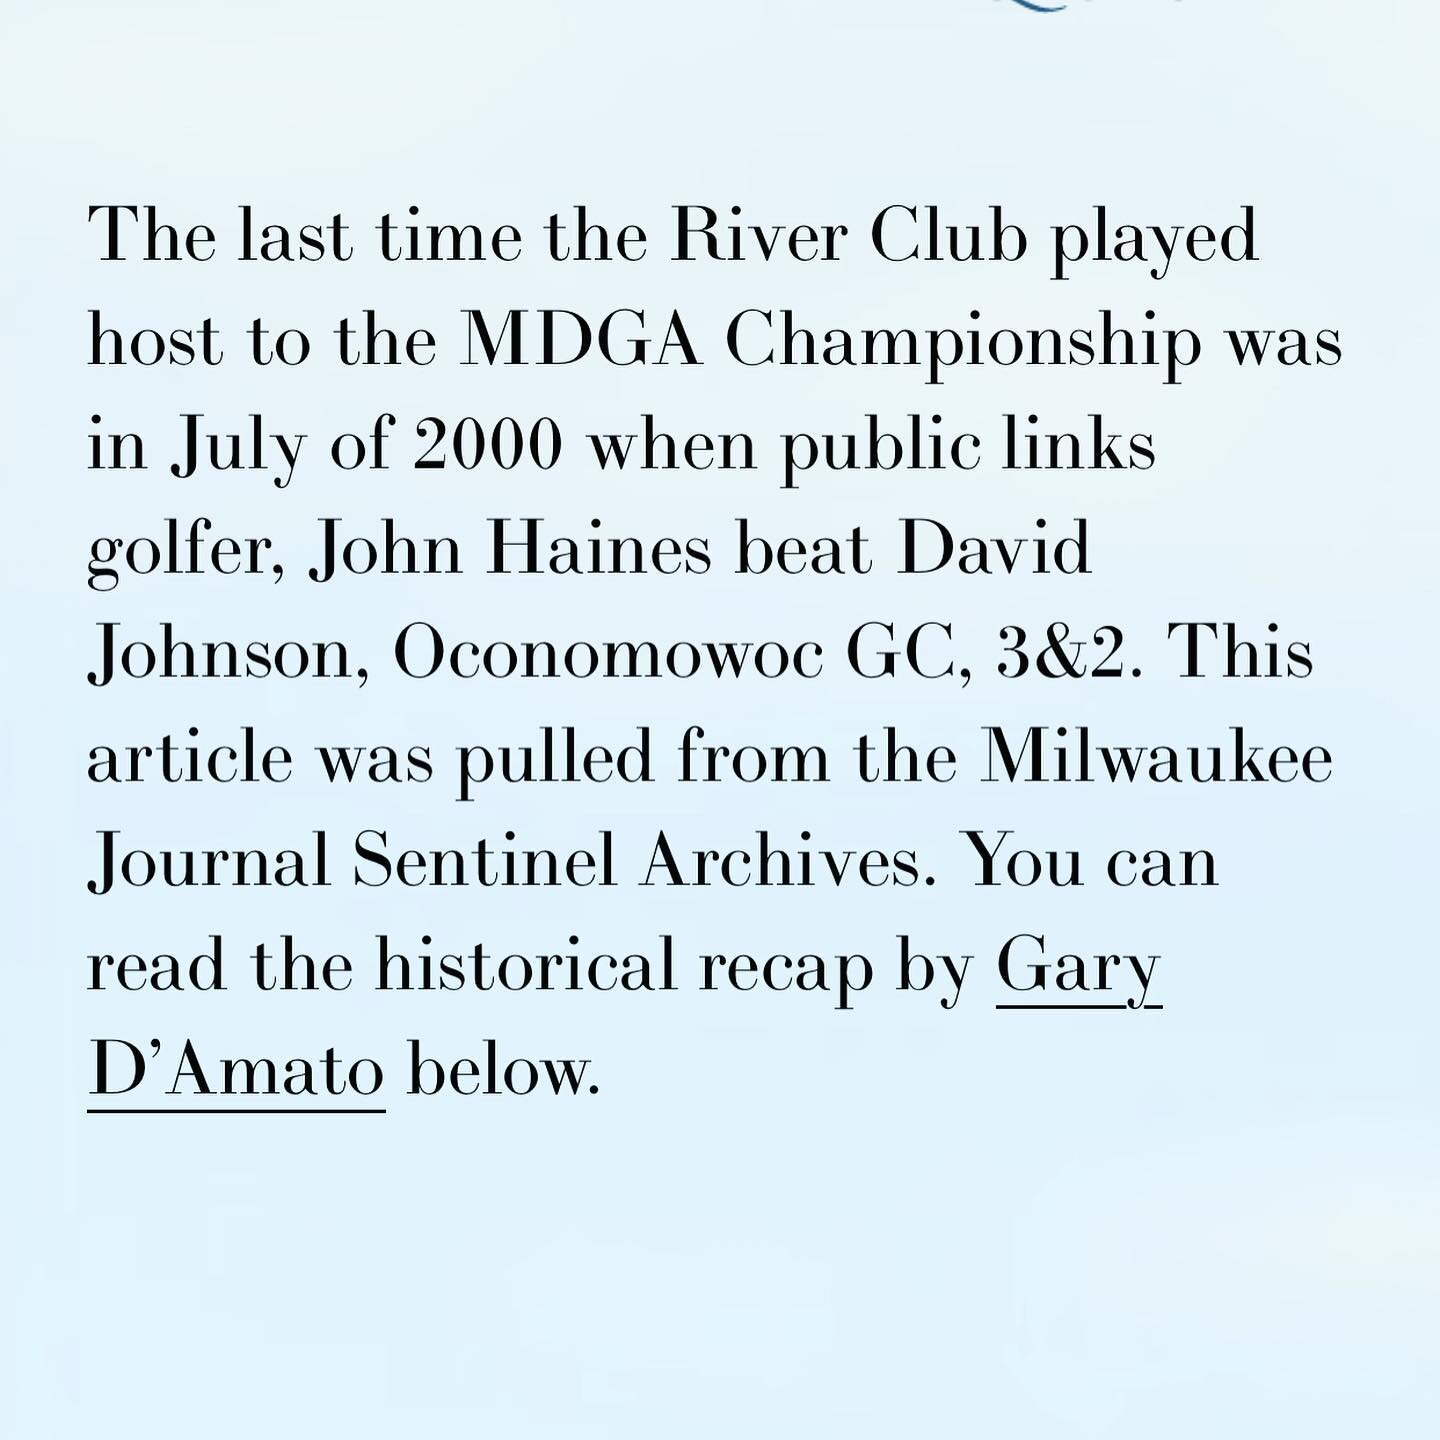 Excited to announce that the River Club of Mequon will host the 2024 championship! Registration is open on our website. Check out the recap from the year 2000 when John Haines clinched the title at the River Club of Mequon. Full article by Gary D&rsq